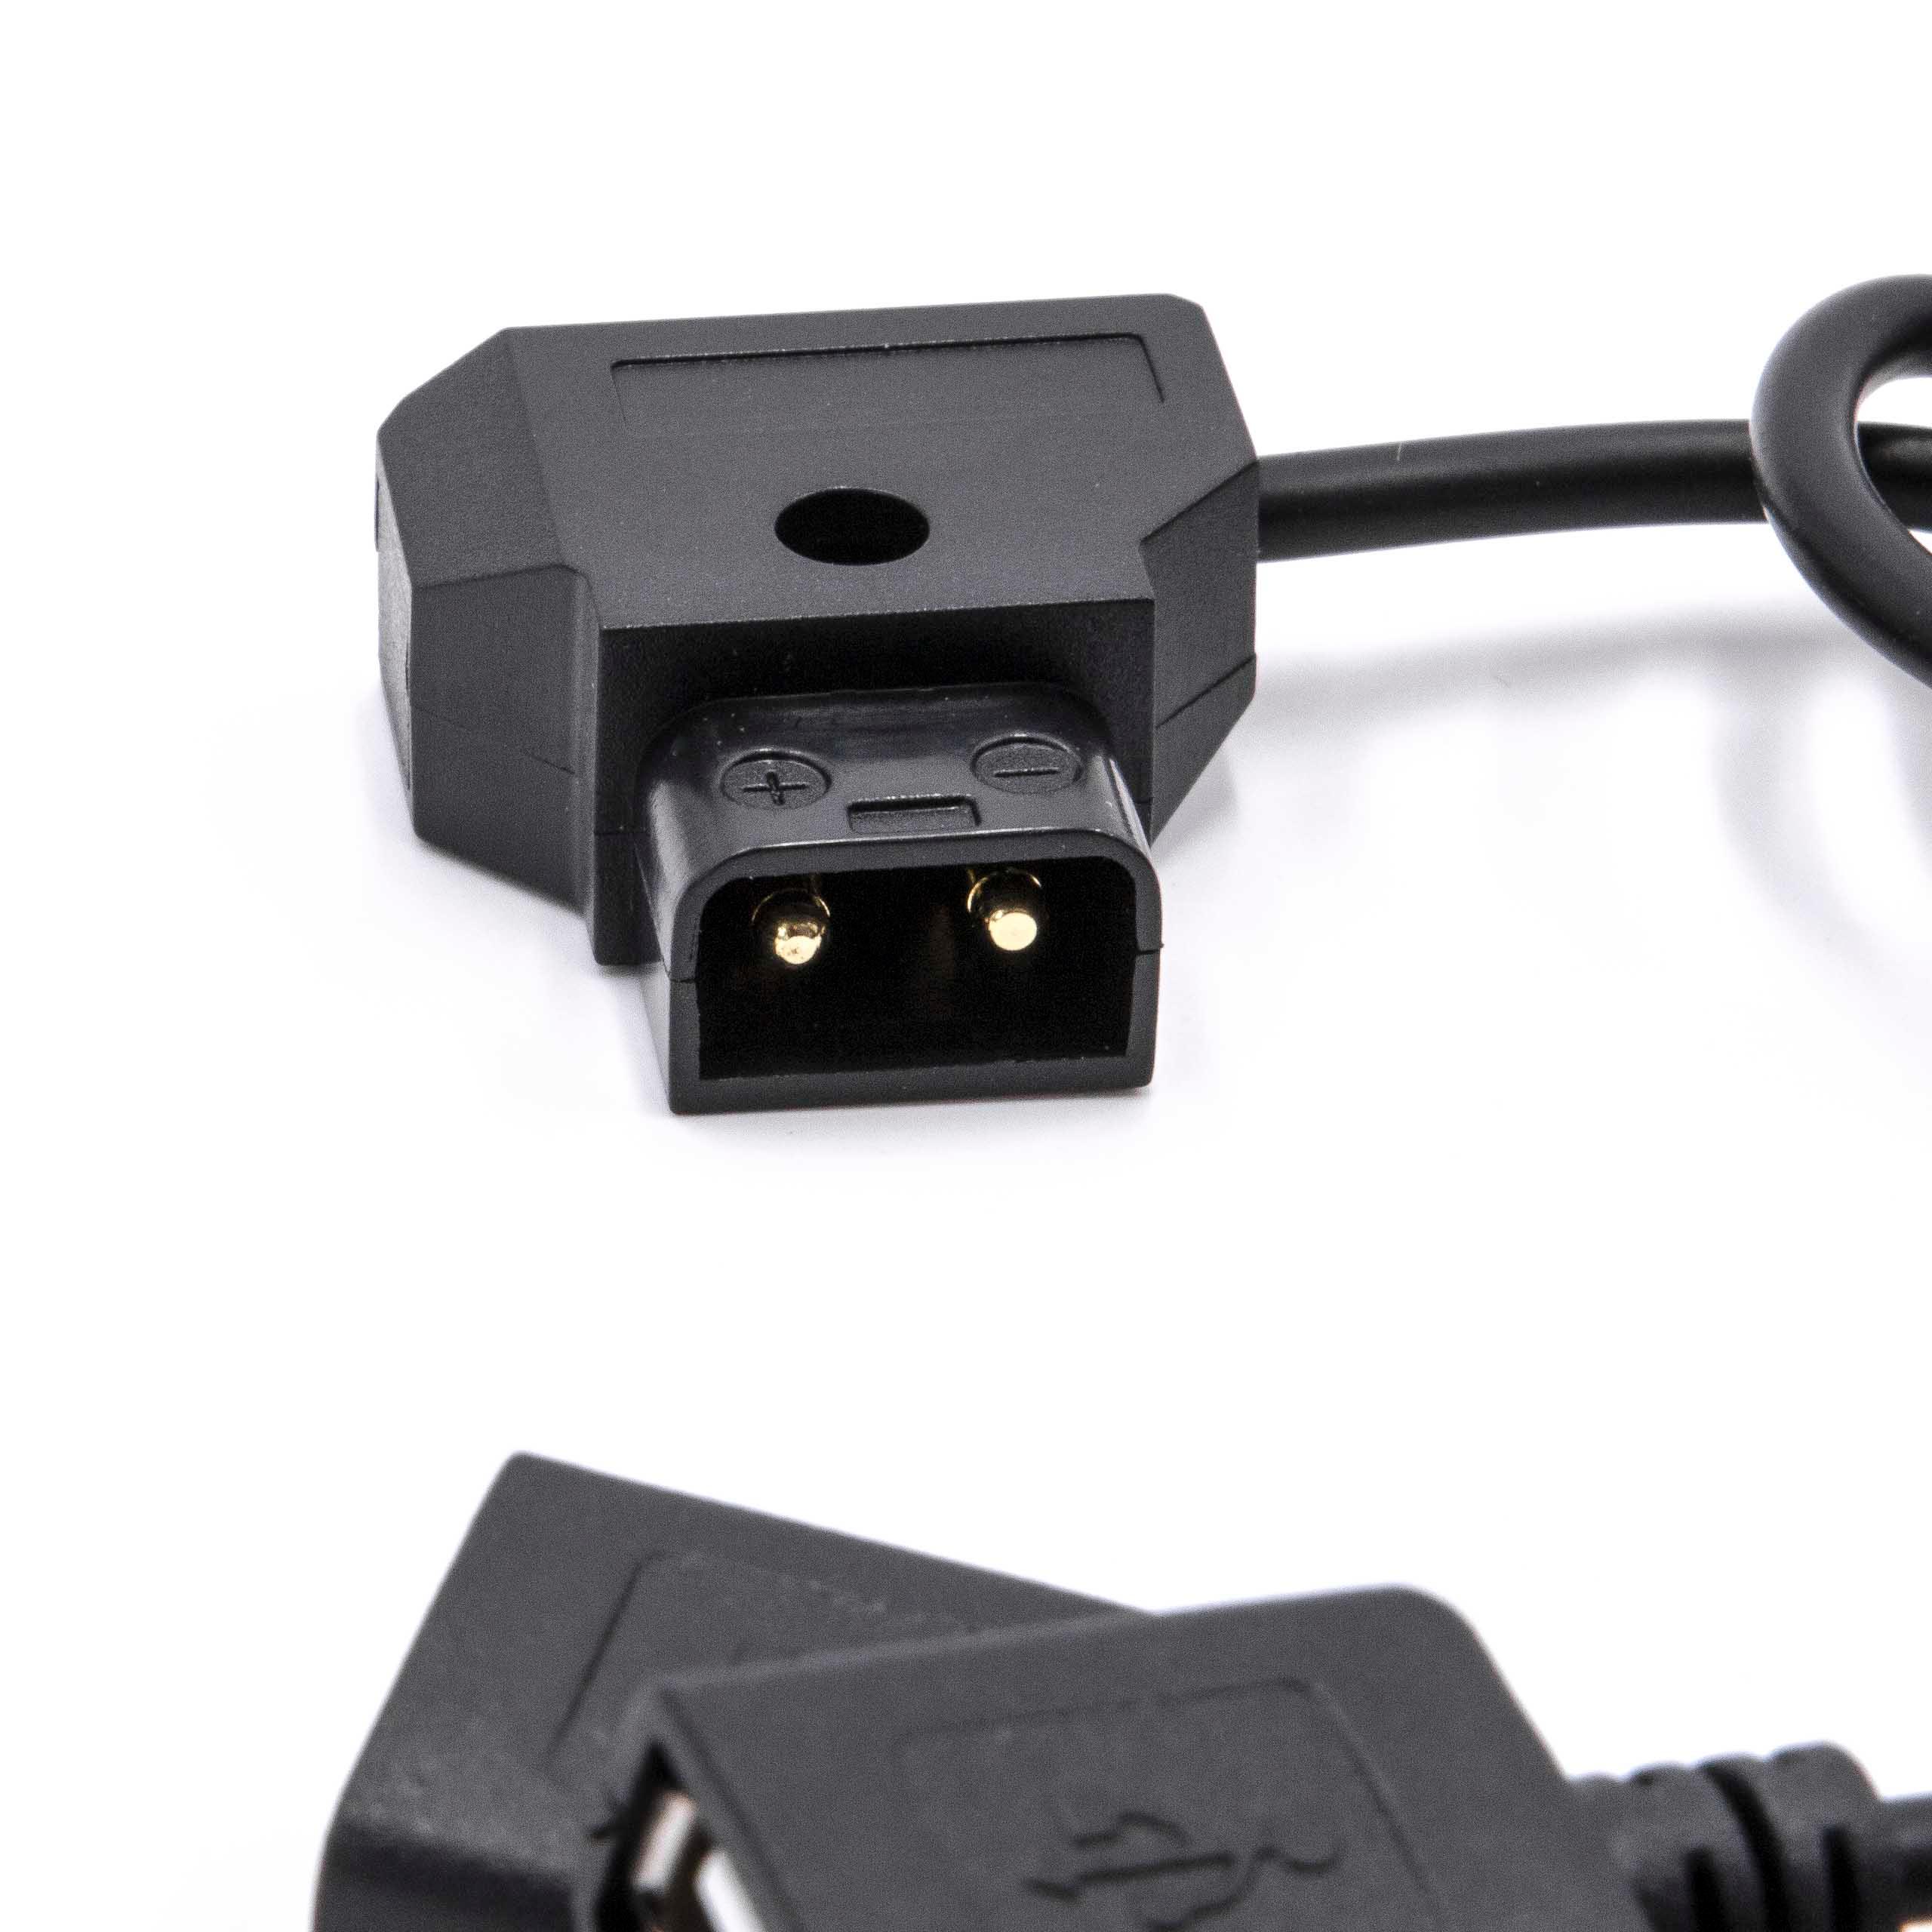 Adapter Cable D-Tap (male) to 2x USB port (female) suitable for Camera - 1.8 m Black